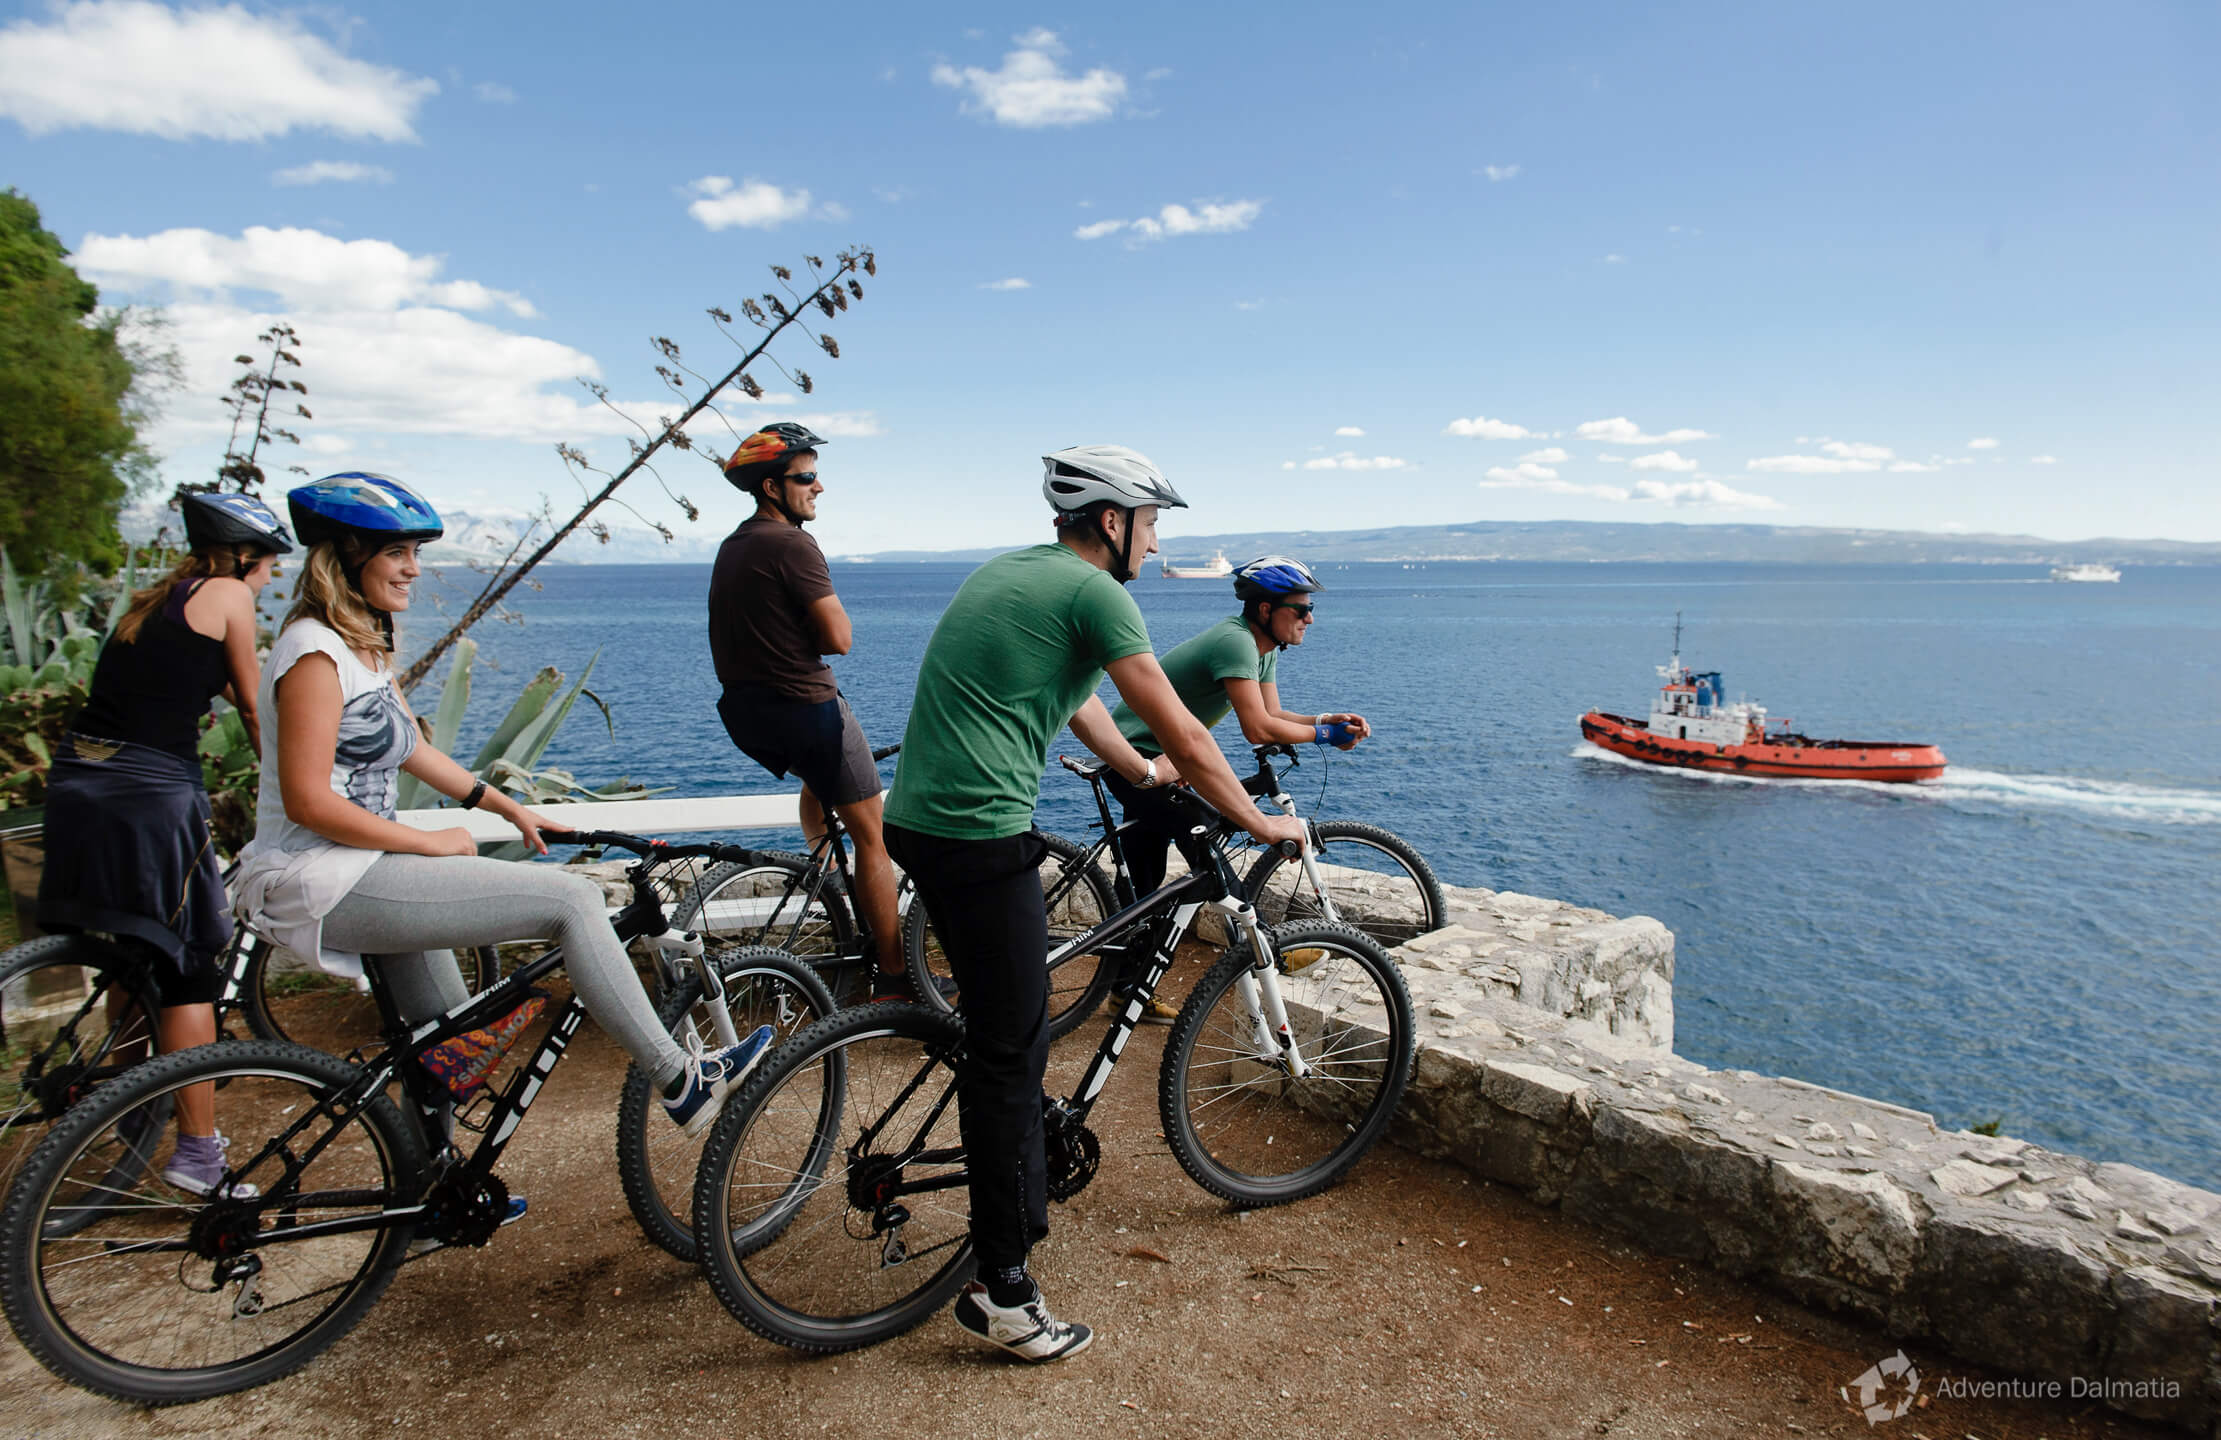 Biking is a perfect way to explore both mainland and islands.